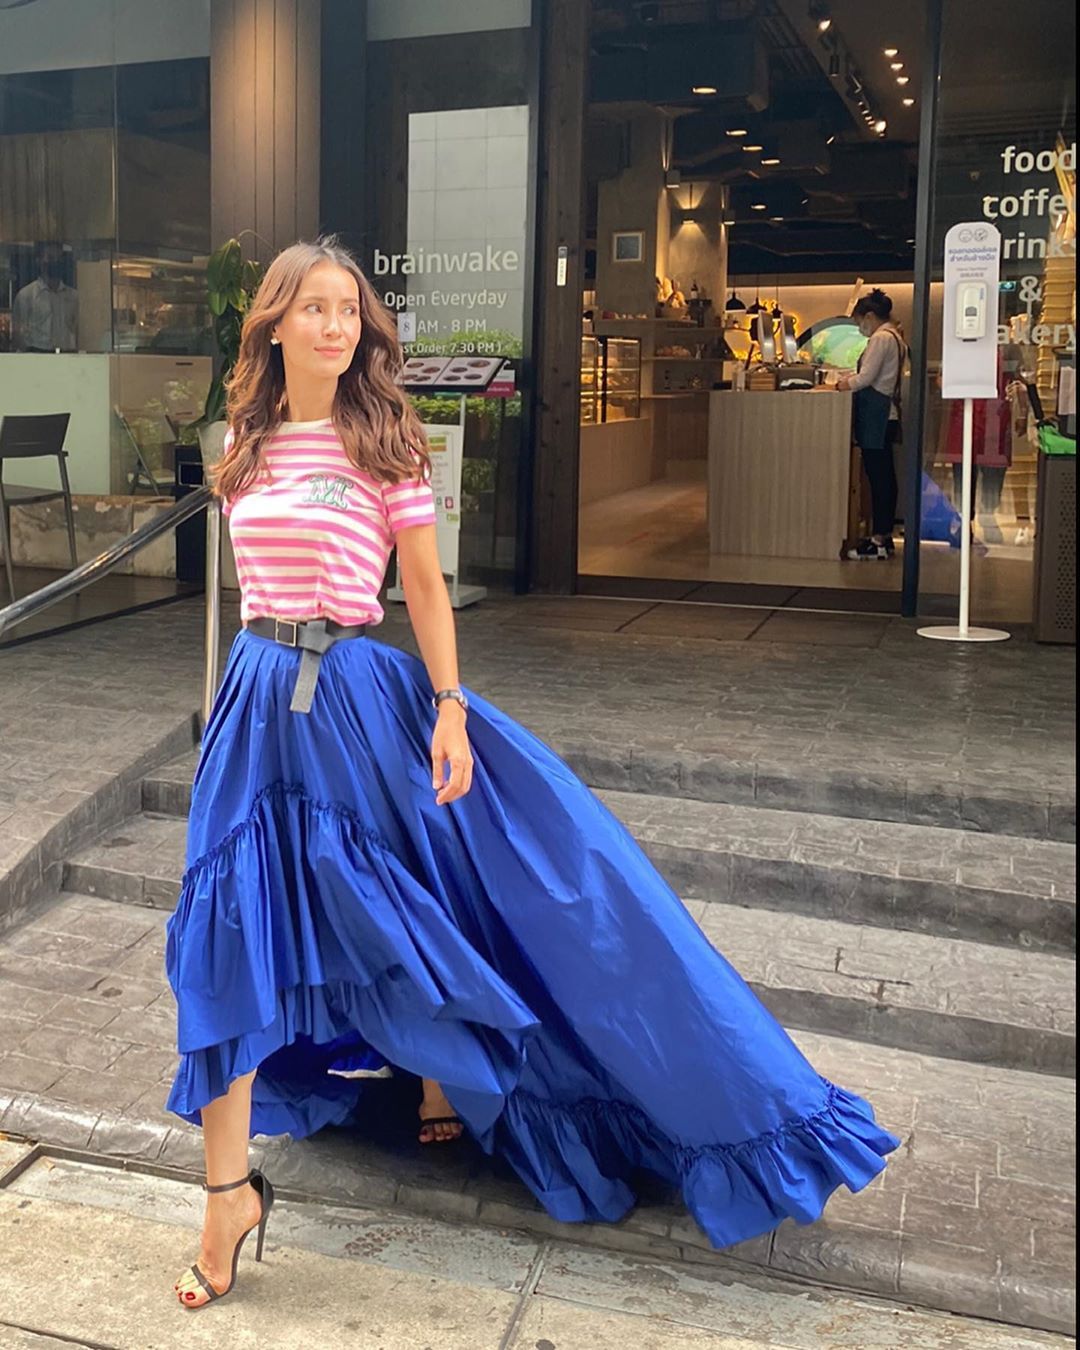 Max Mara - Actress @annethong wears the #MaxMaraPreFall20 total look featuring the striped fuchsia t-shirt combined with the asymmetrical taffeta skirt in cobalt blue.